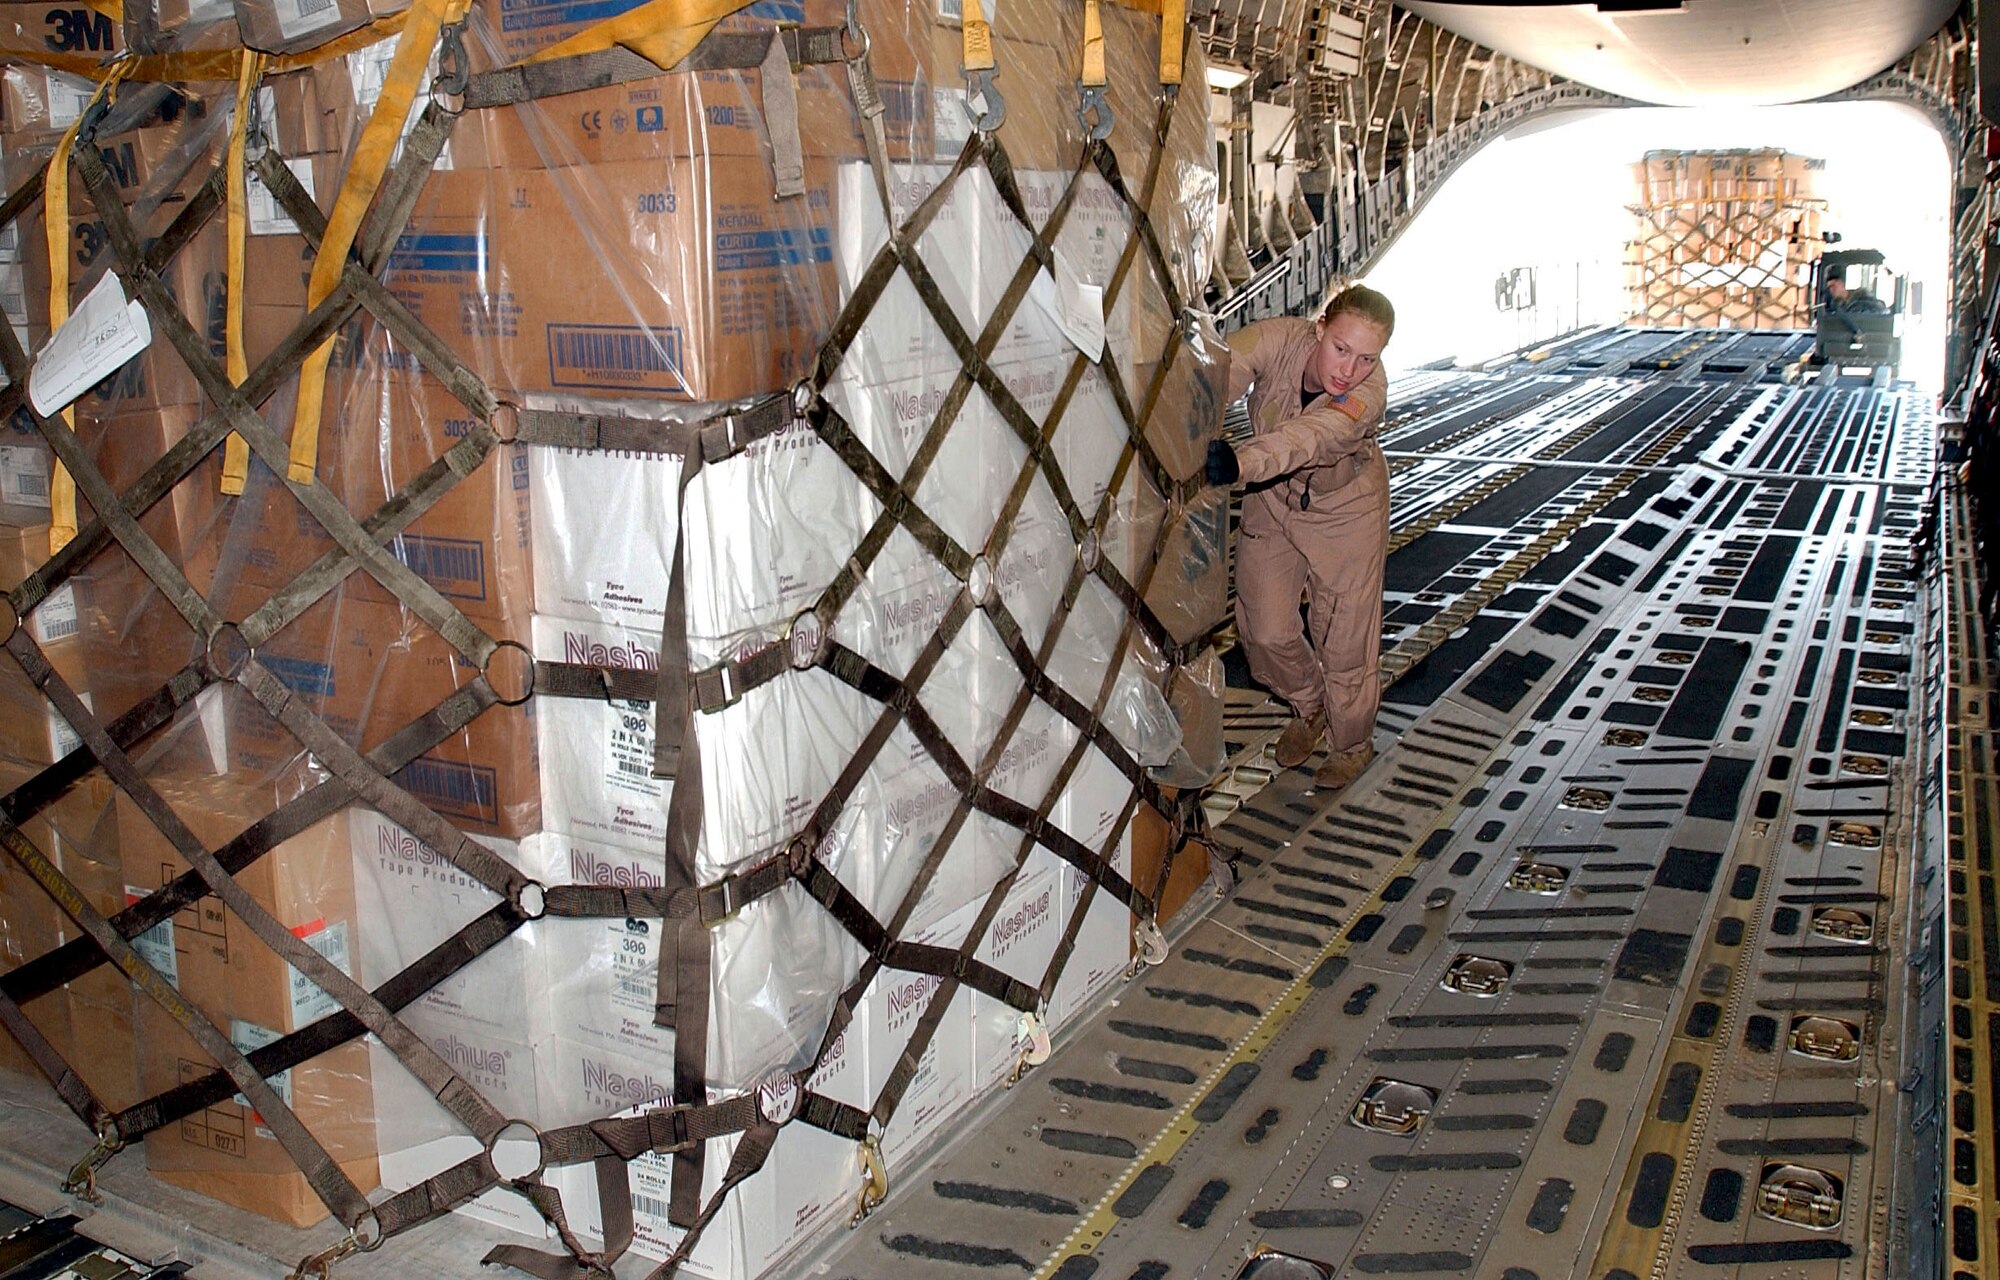 OPERATION IRAQI FREEDOM -- A crewmember pushes a pallet of cargo onto a C-17 Globemaster III.  The C-17 landed a Burgas Airport on its way to deliver humanitarian aid to the people of Iraq.  (U.S. Air Force photo by Master Sgt. Dave Ahlschwede)